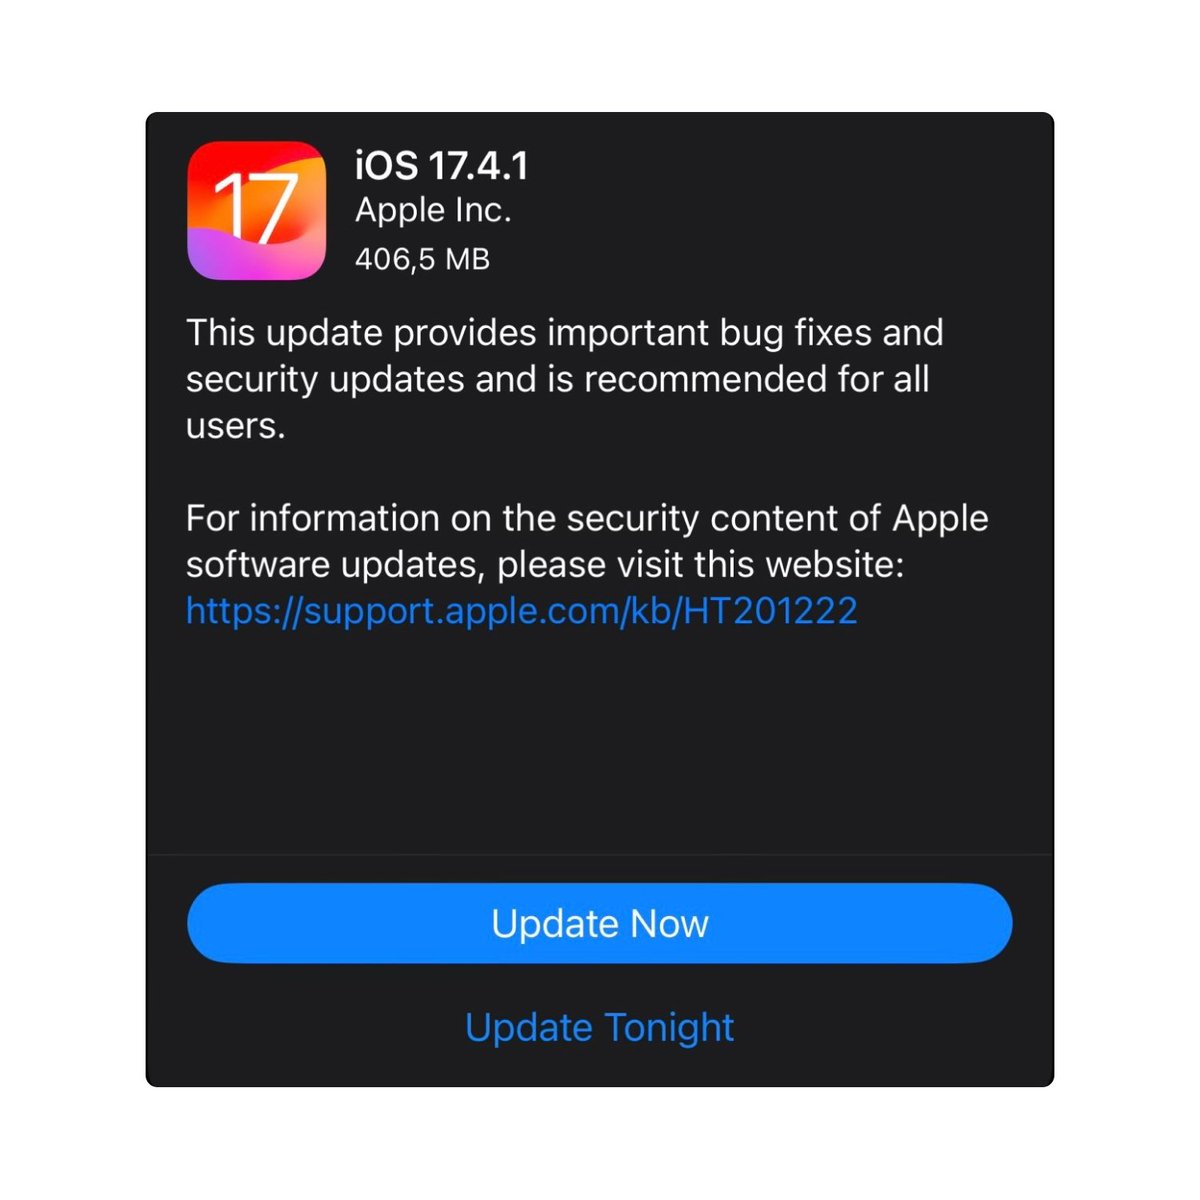 iOS 17.4.1 is out now! #iPhone15Pro #iOS17 #iPad #Apple #appleevent